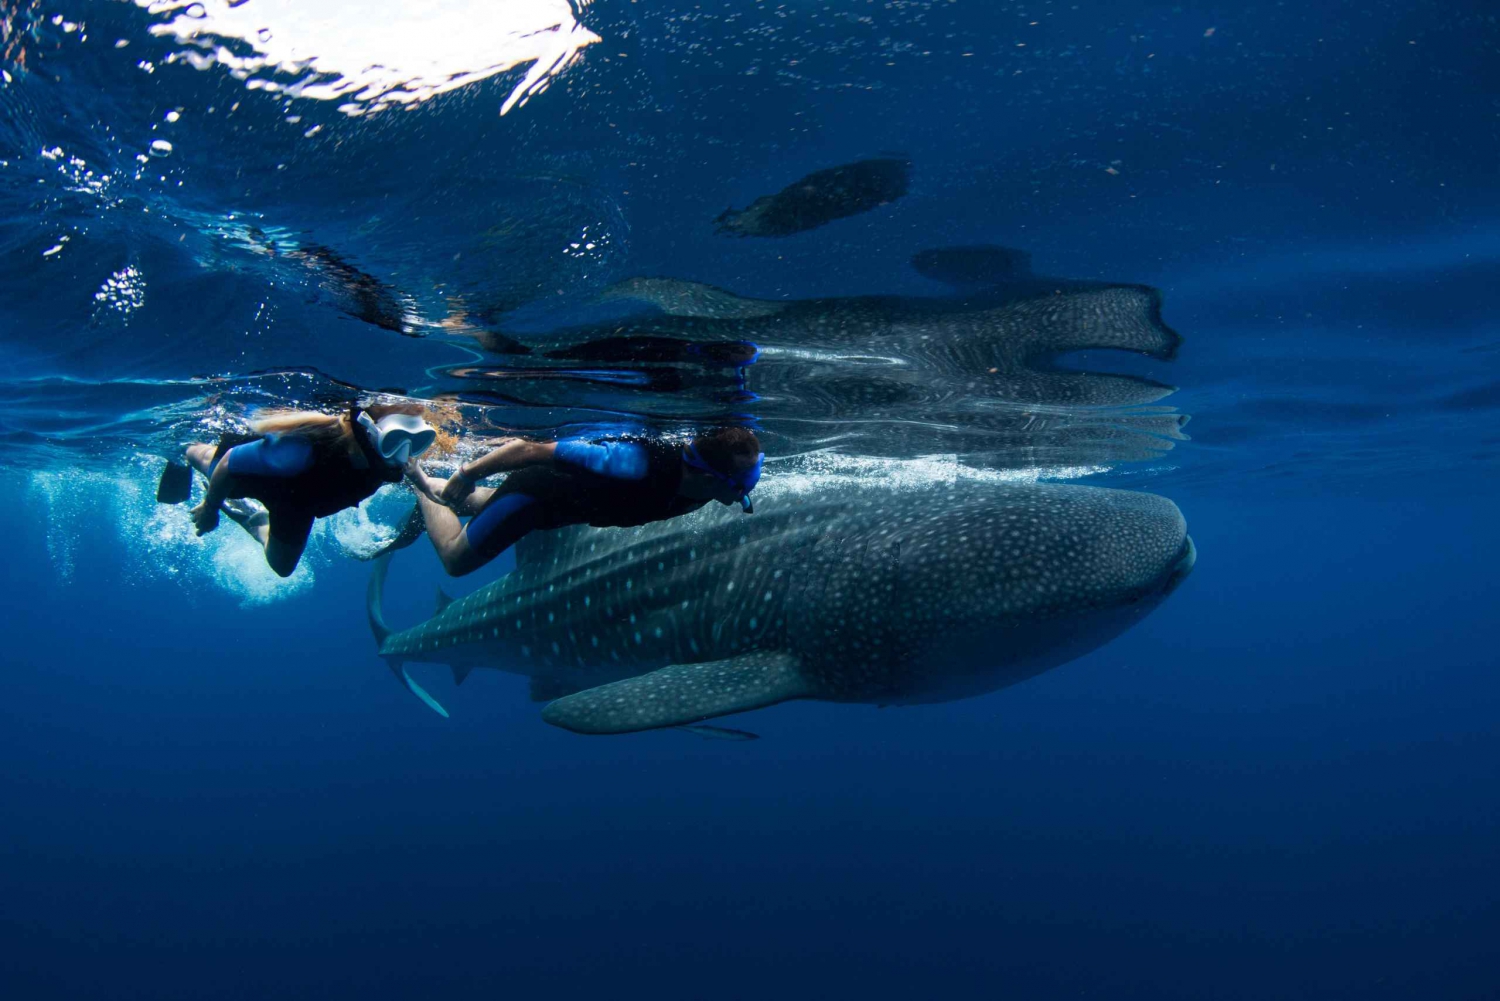 From Cancun/Riviera Maya: Guided Whale Shark Snorkeling Tour